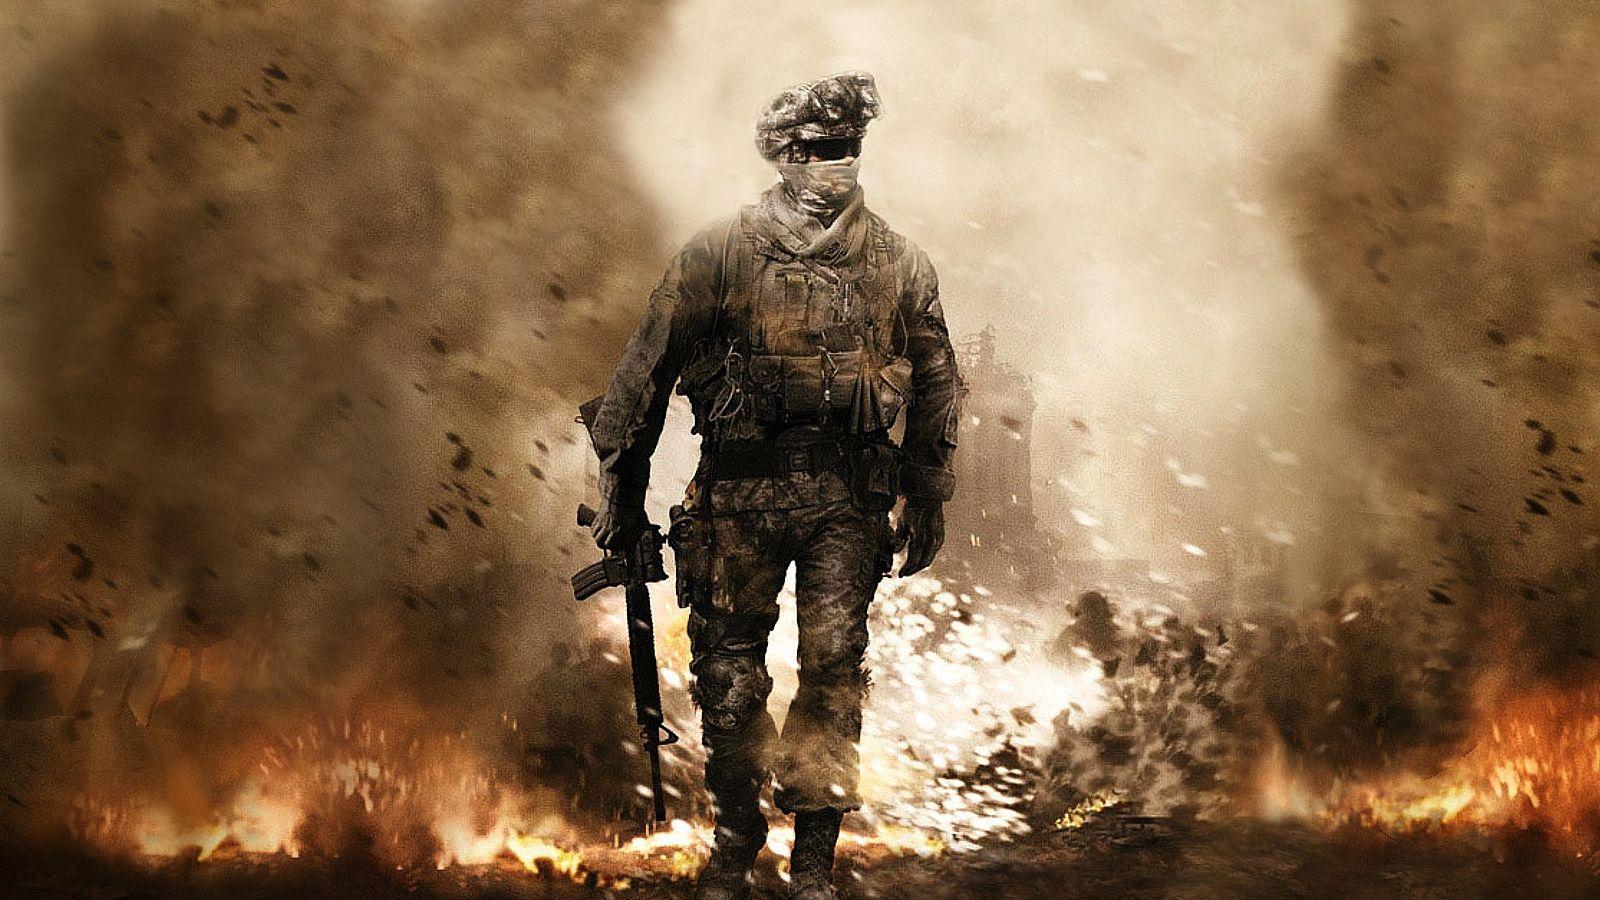 Wallpaper Call of Duty Modern Warfare 2 Call of Duty 4 Modern Warfare Modern  Warfare 2 Ghost Soldier Army Background  Download Free Image